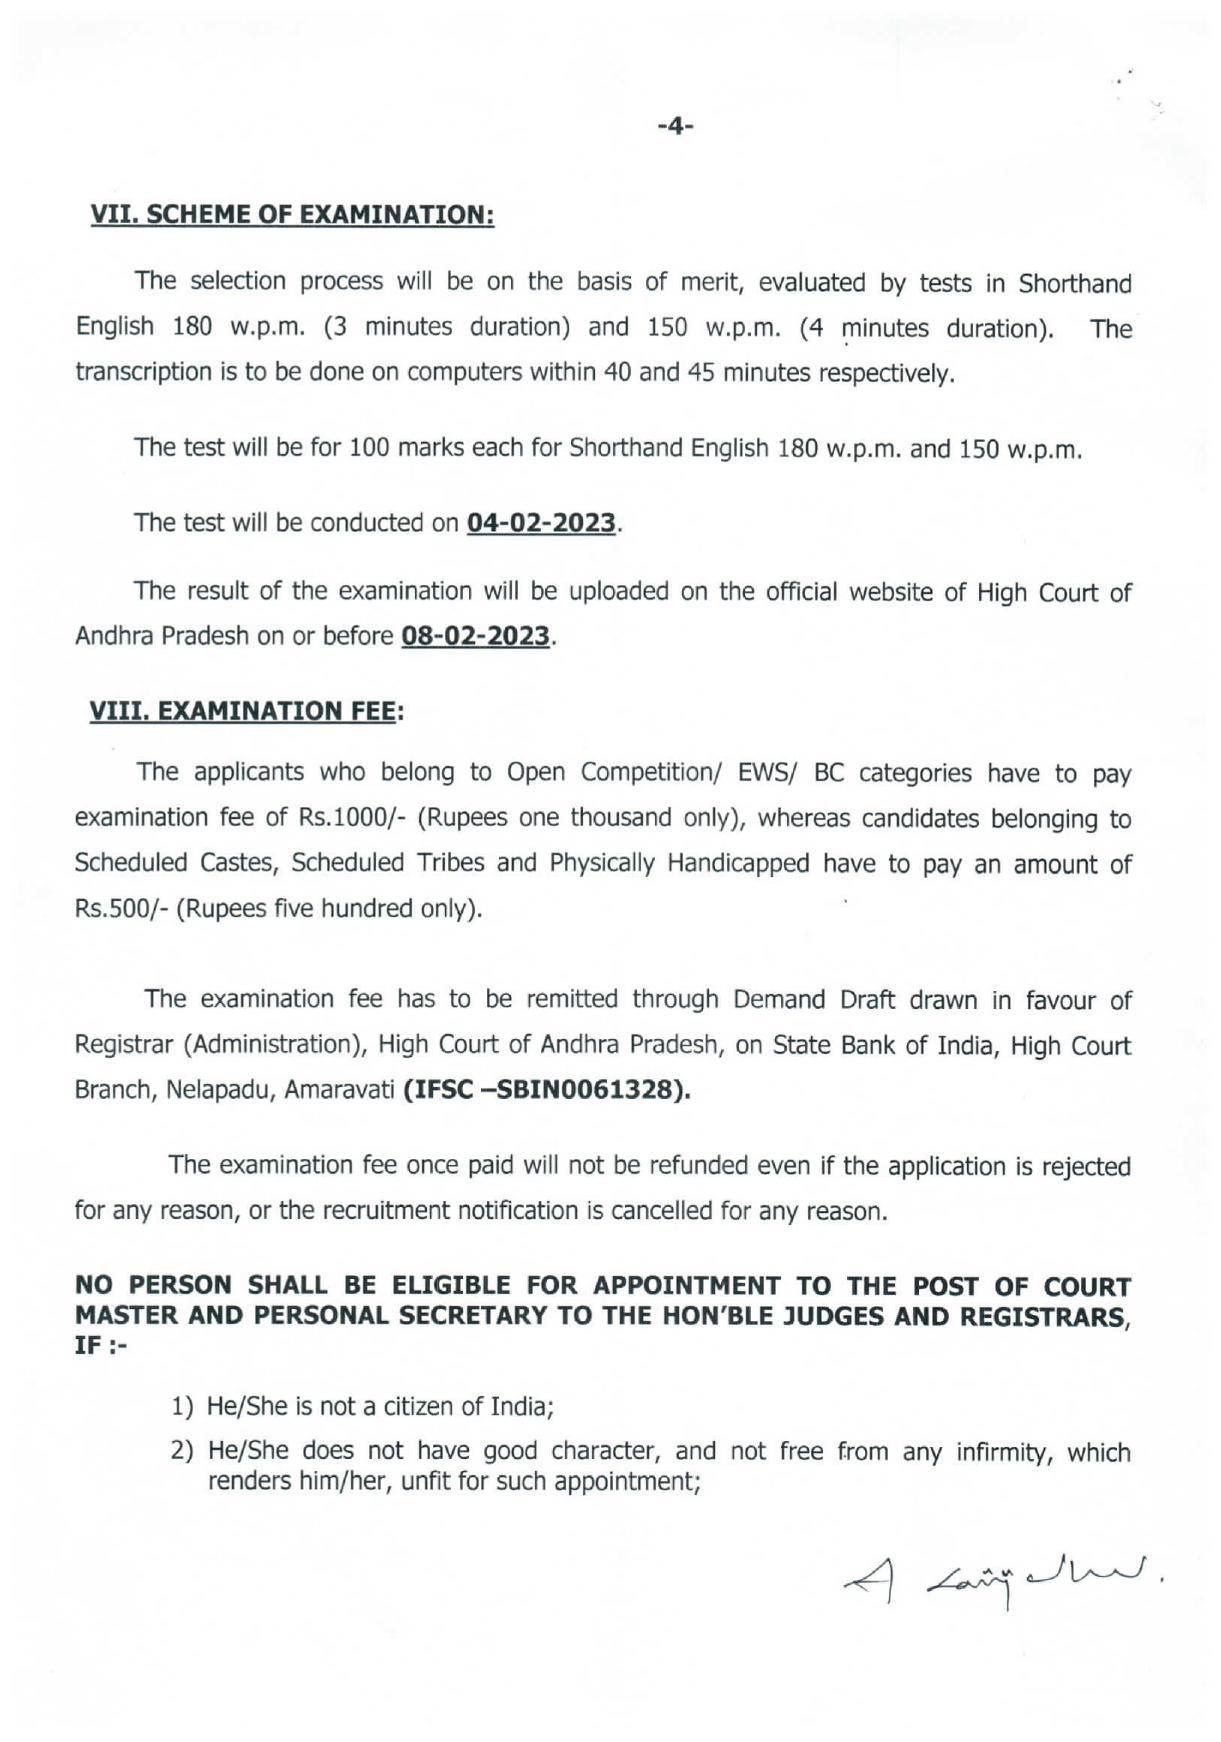 High Court of Andhra Pradesh Invites Application for 39 Court Master, Personal Secretary Recruitment 2023 - Page 11